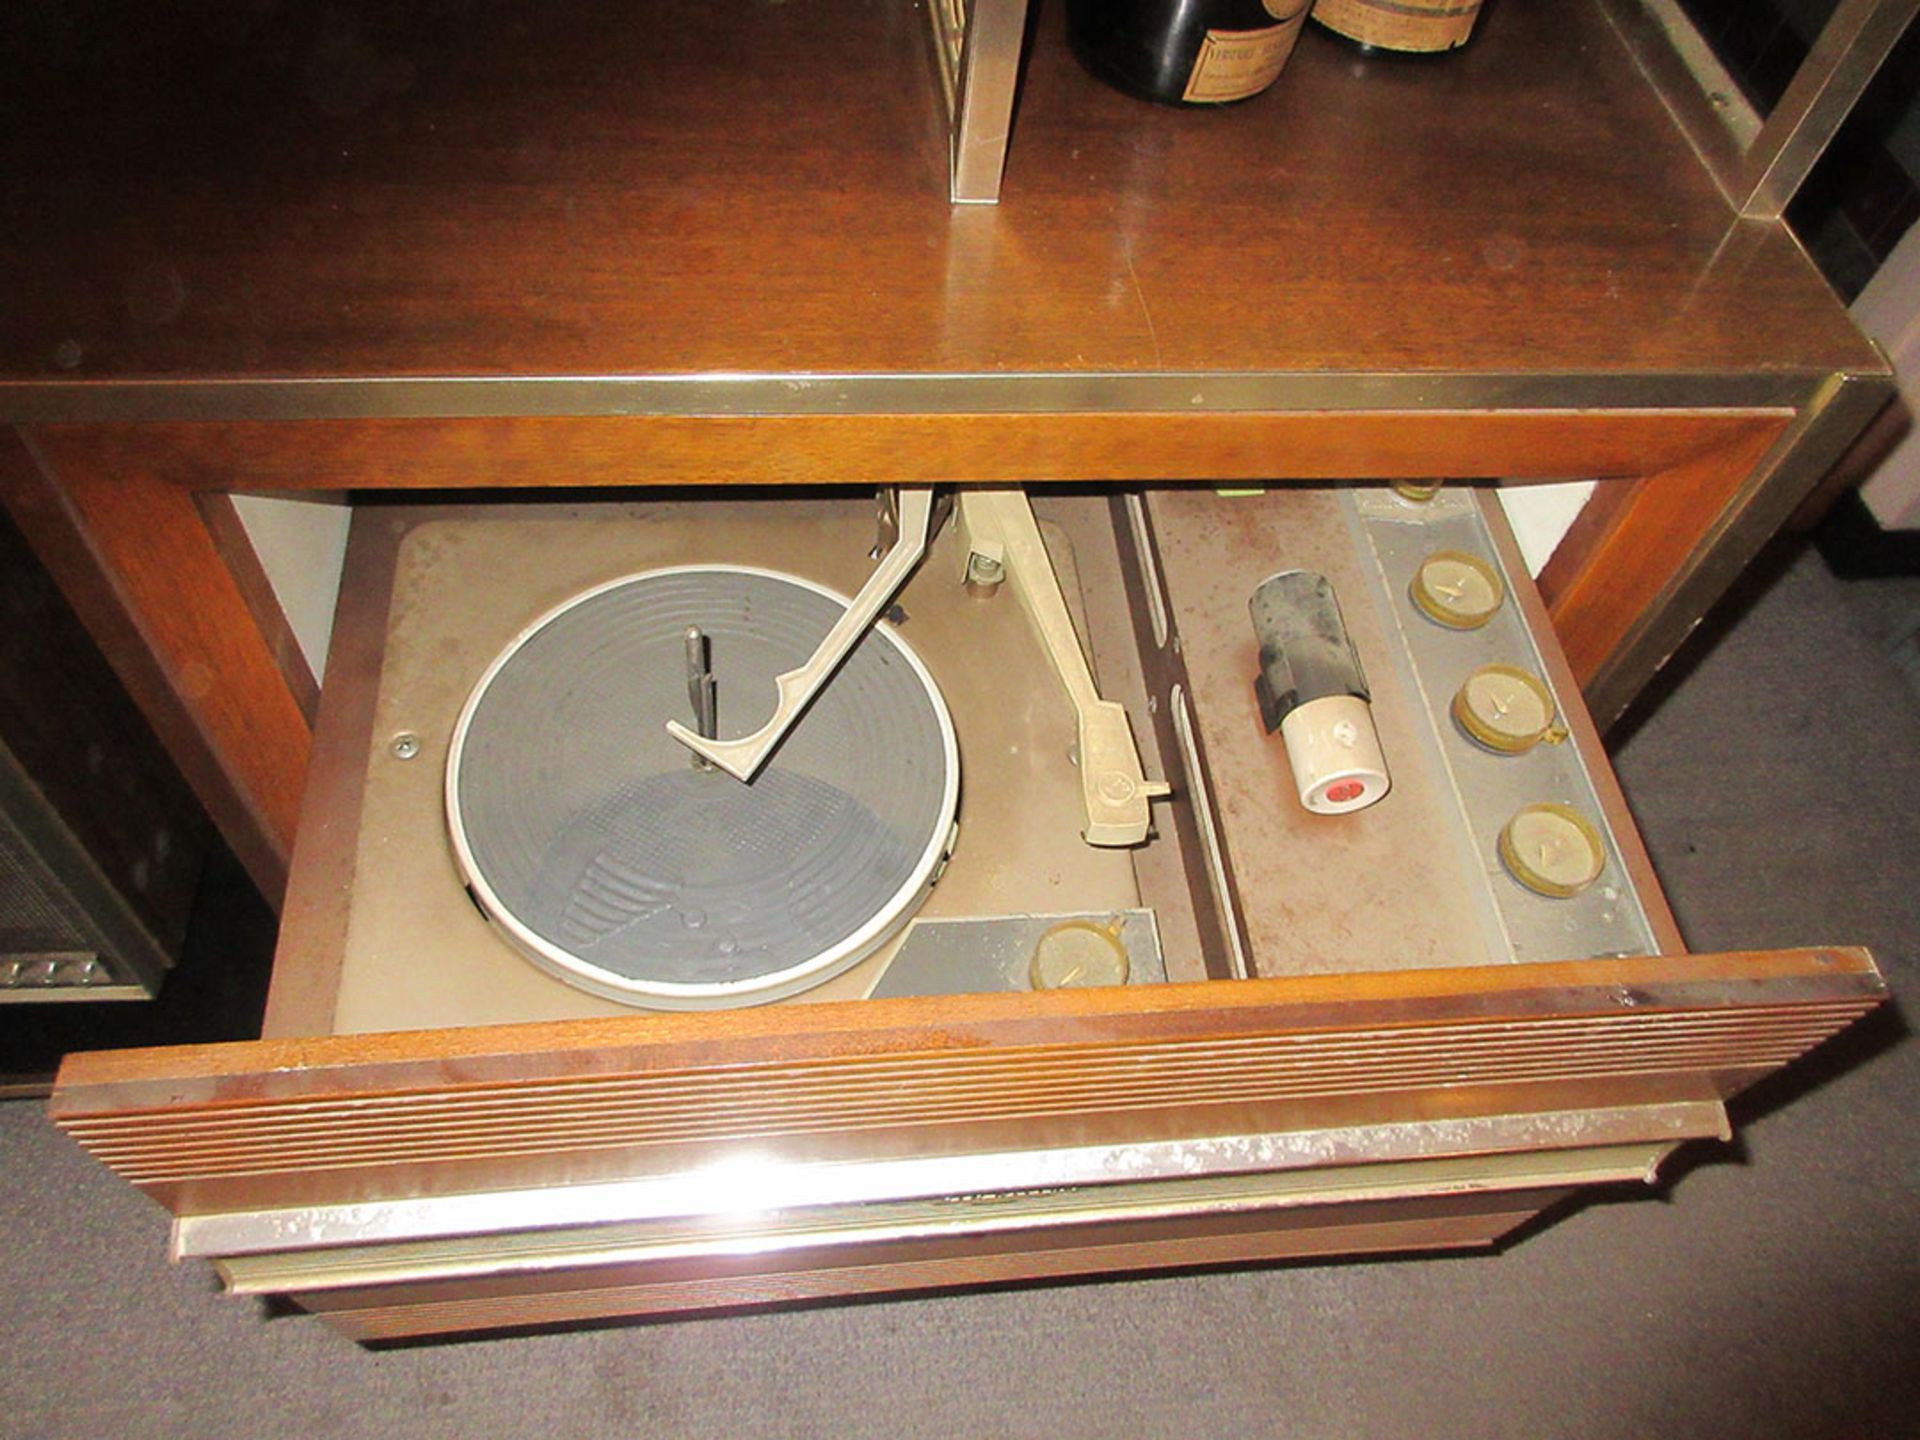 RCA VICTOR ENTERTAINMENT CENTER WITH OLD 78'S - Image 2 of 2